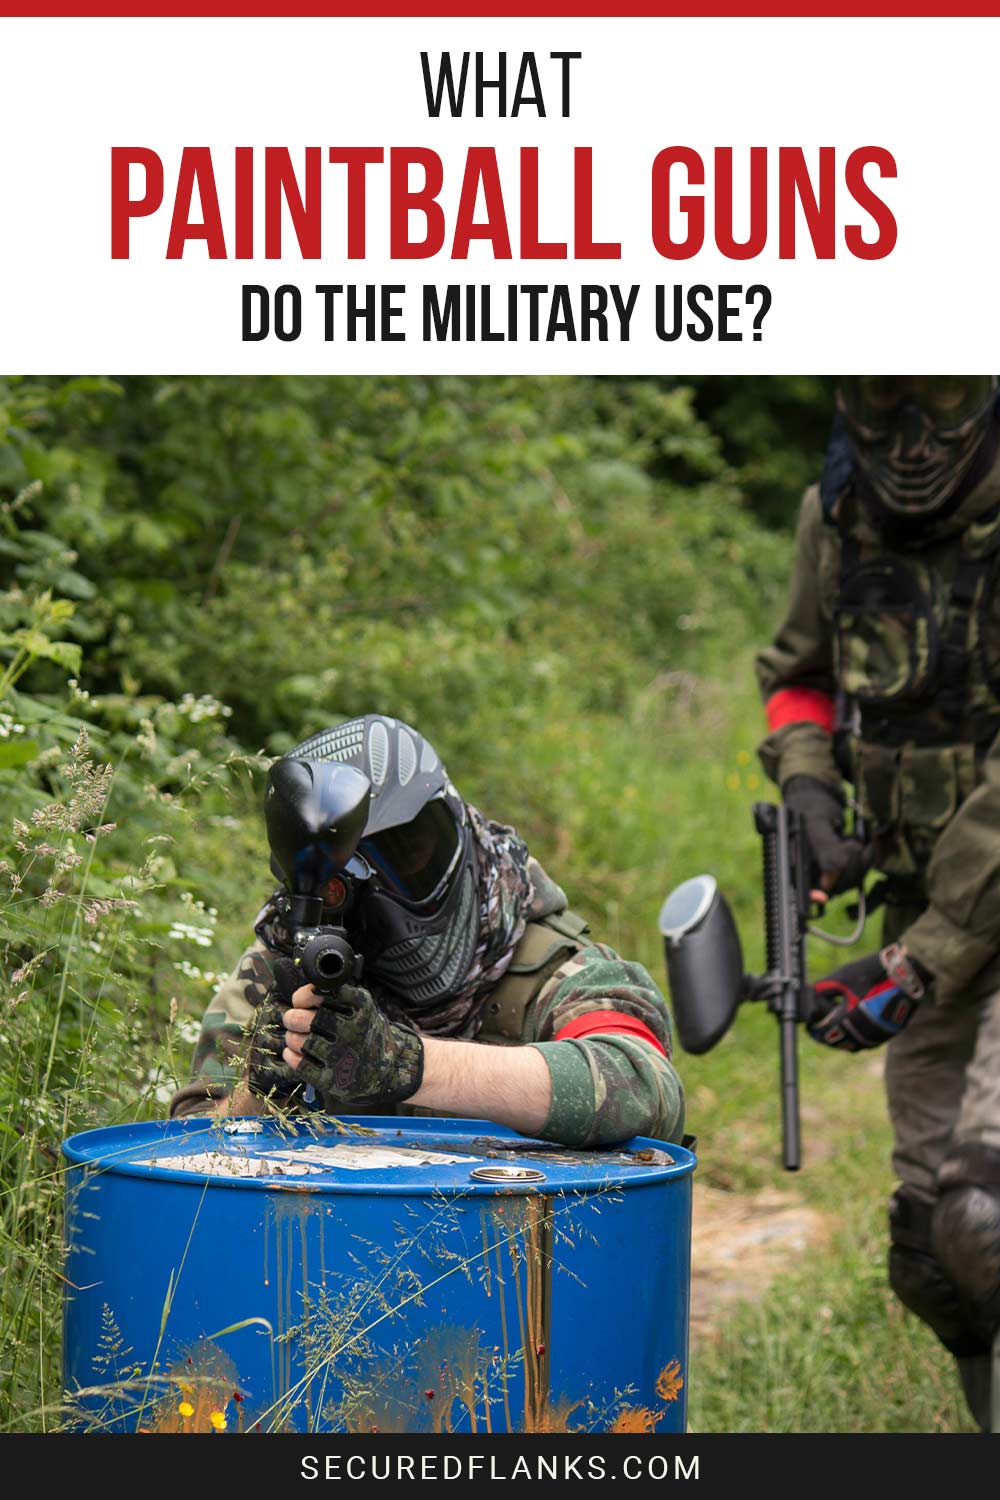 Person aiming with a paintball gun leading on a metal drum - What Paintball Guns Do the Military Use?